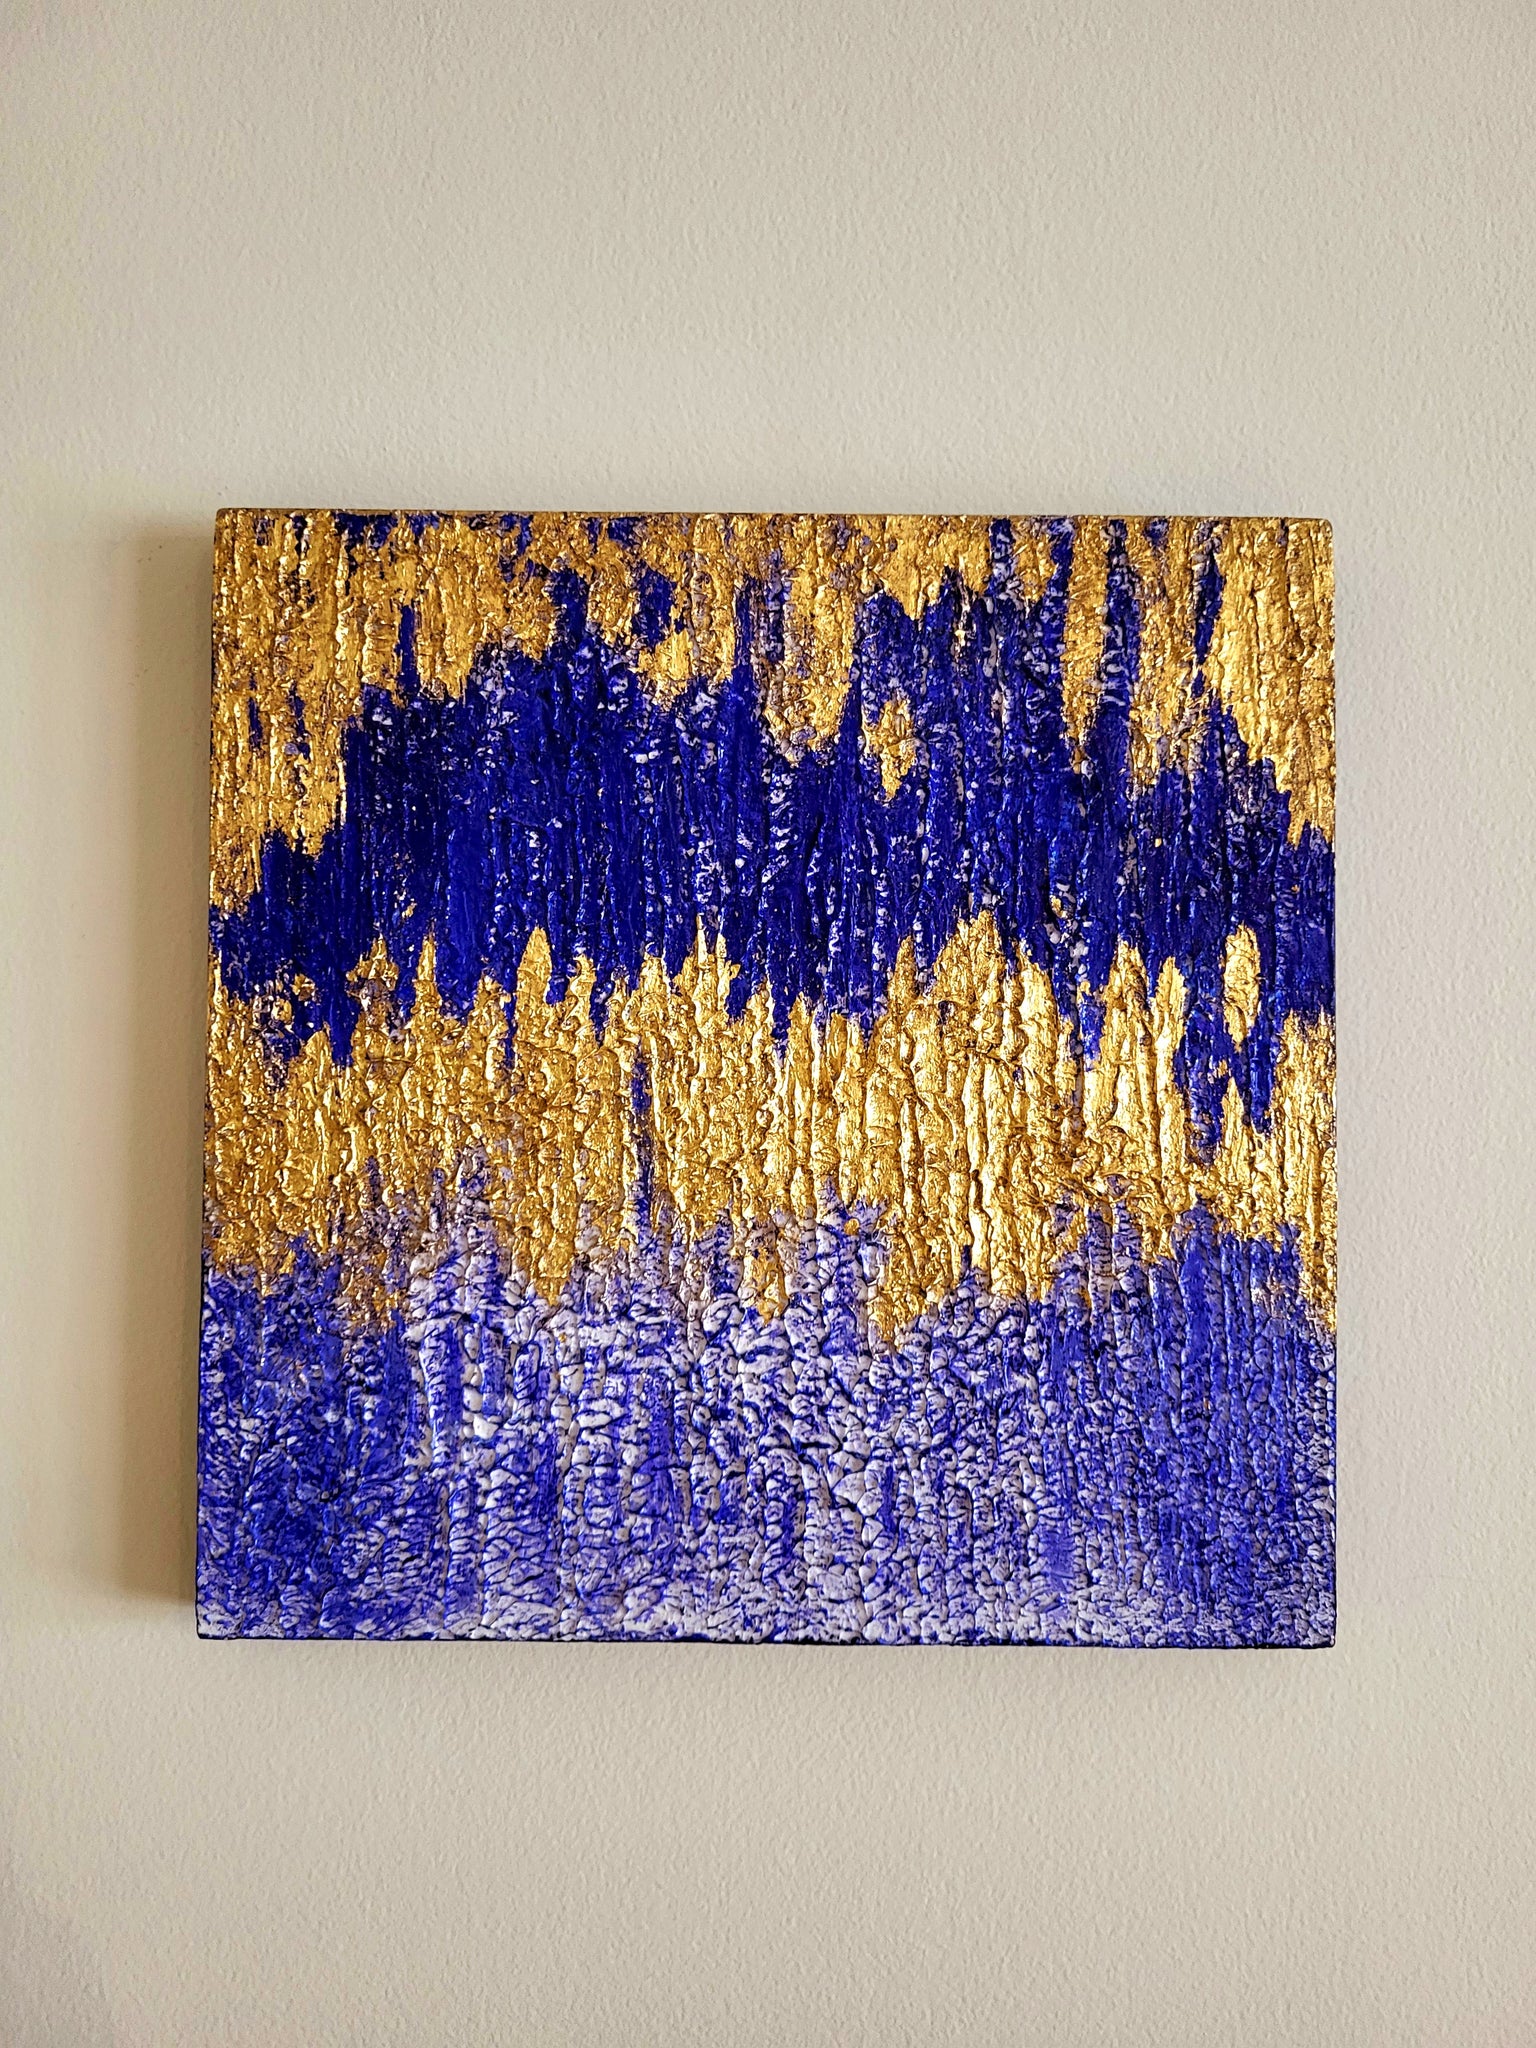 Golden Horizon | Original Art Acrylic Painting, 10x10 inch wood panel by Norma Abou-Rizk